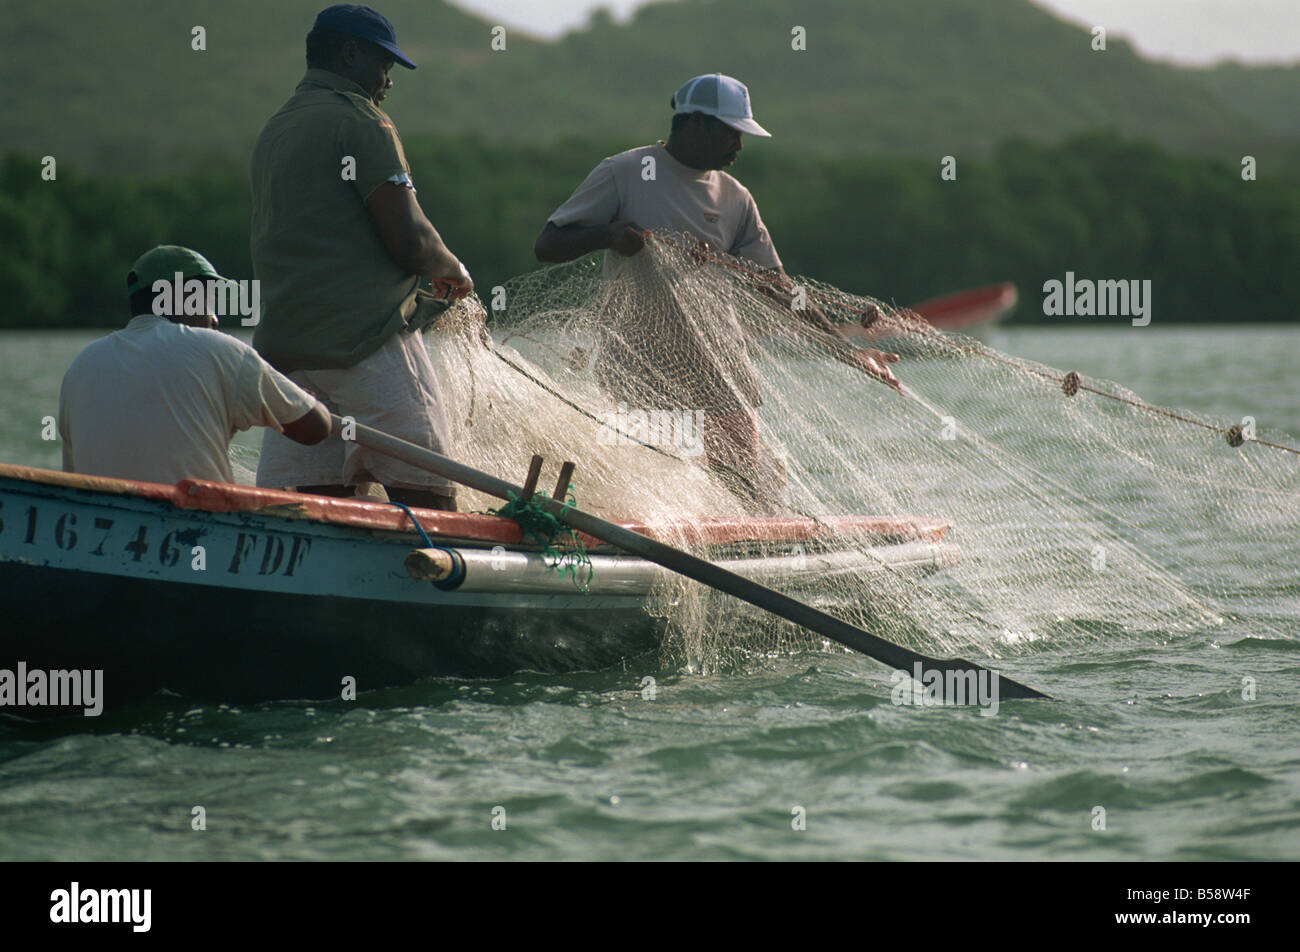 Drawing in fishing nets, Baie des Anglais, Martinique, West Indies, Caribbean, Central America Stock Photo